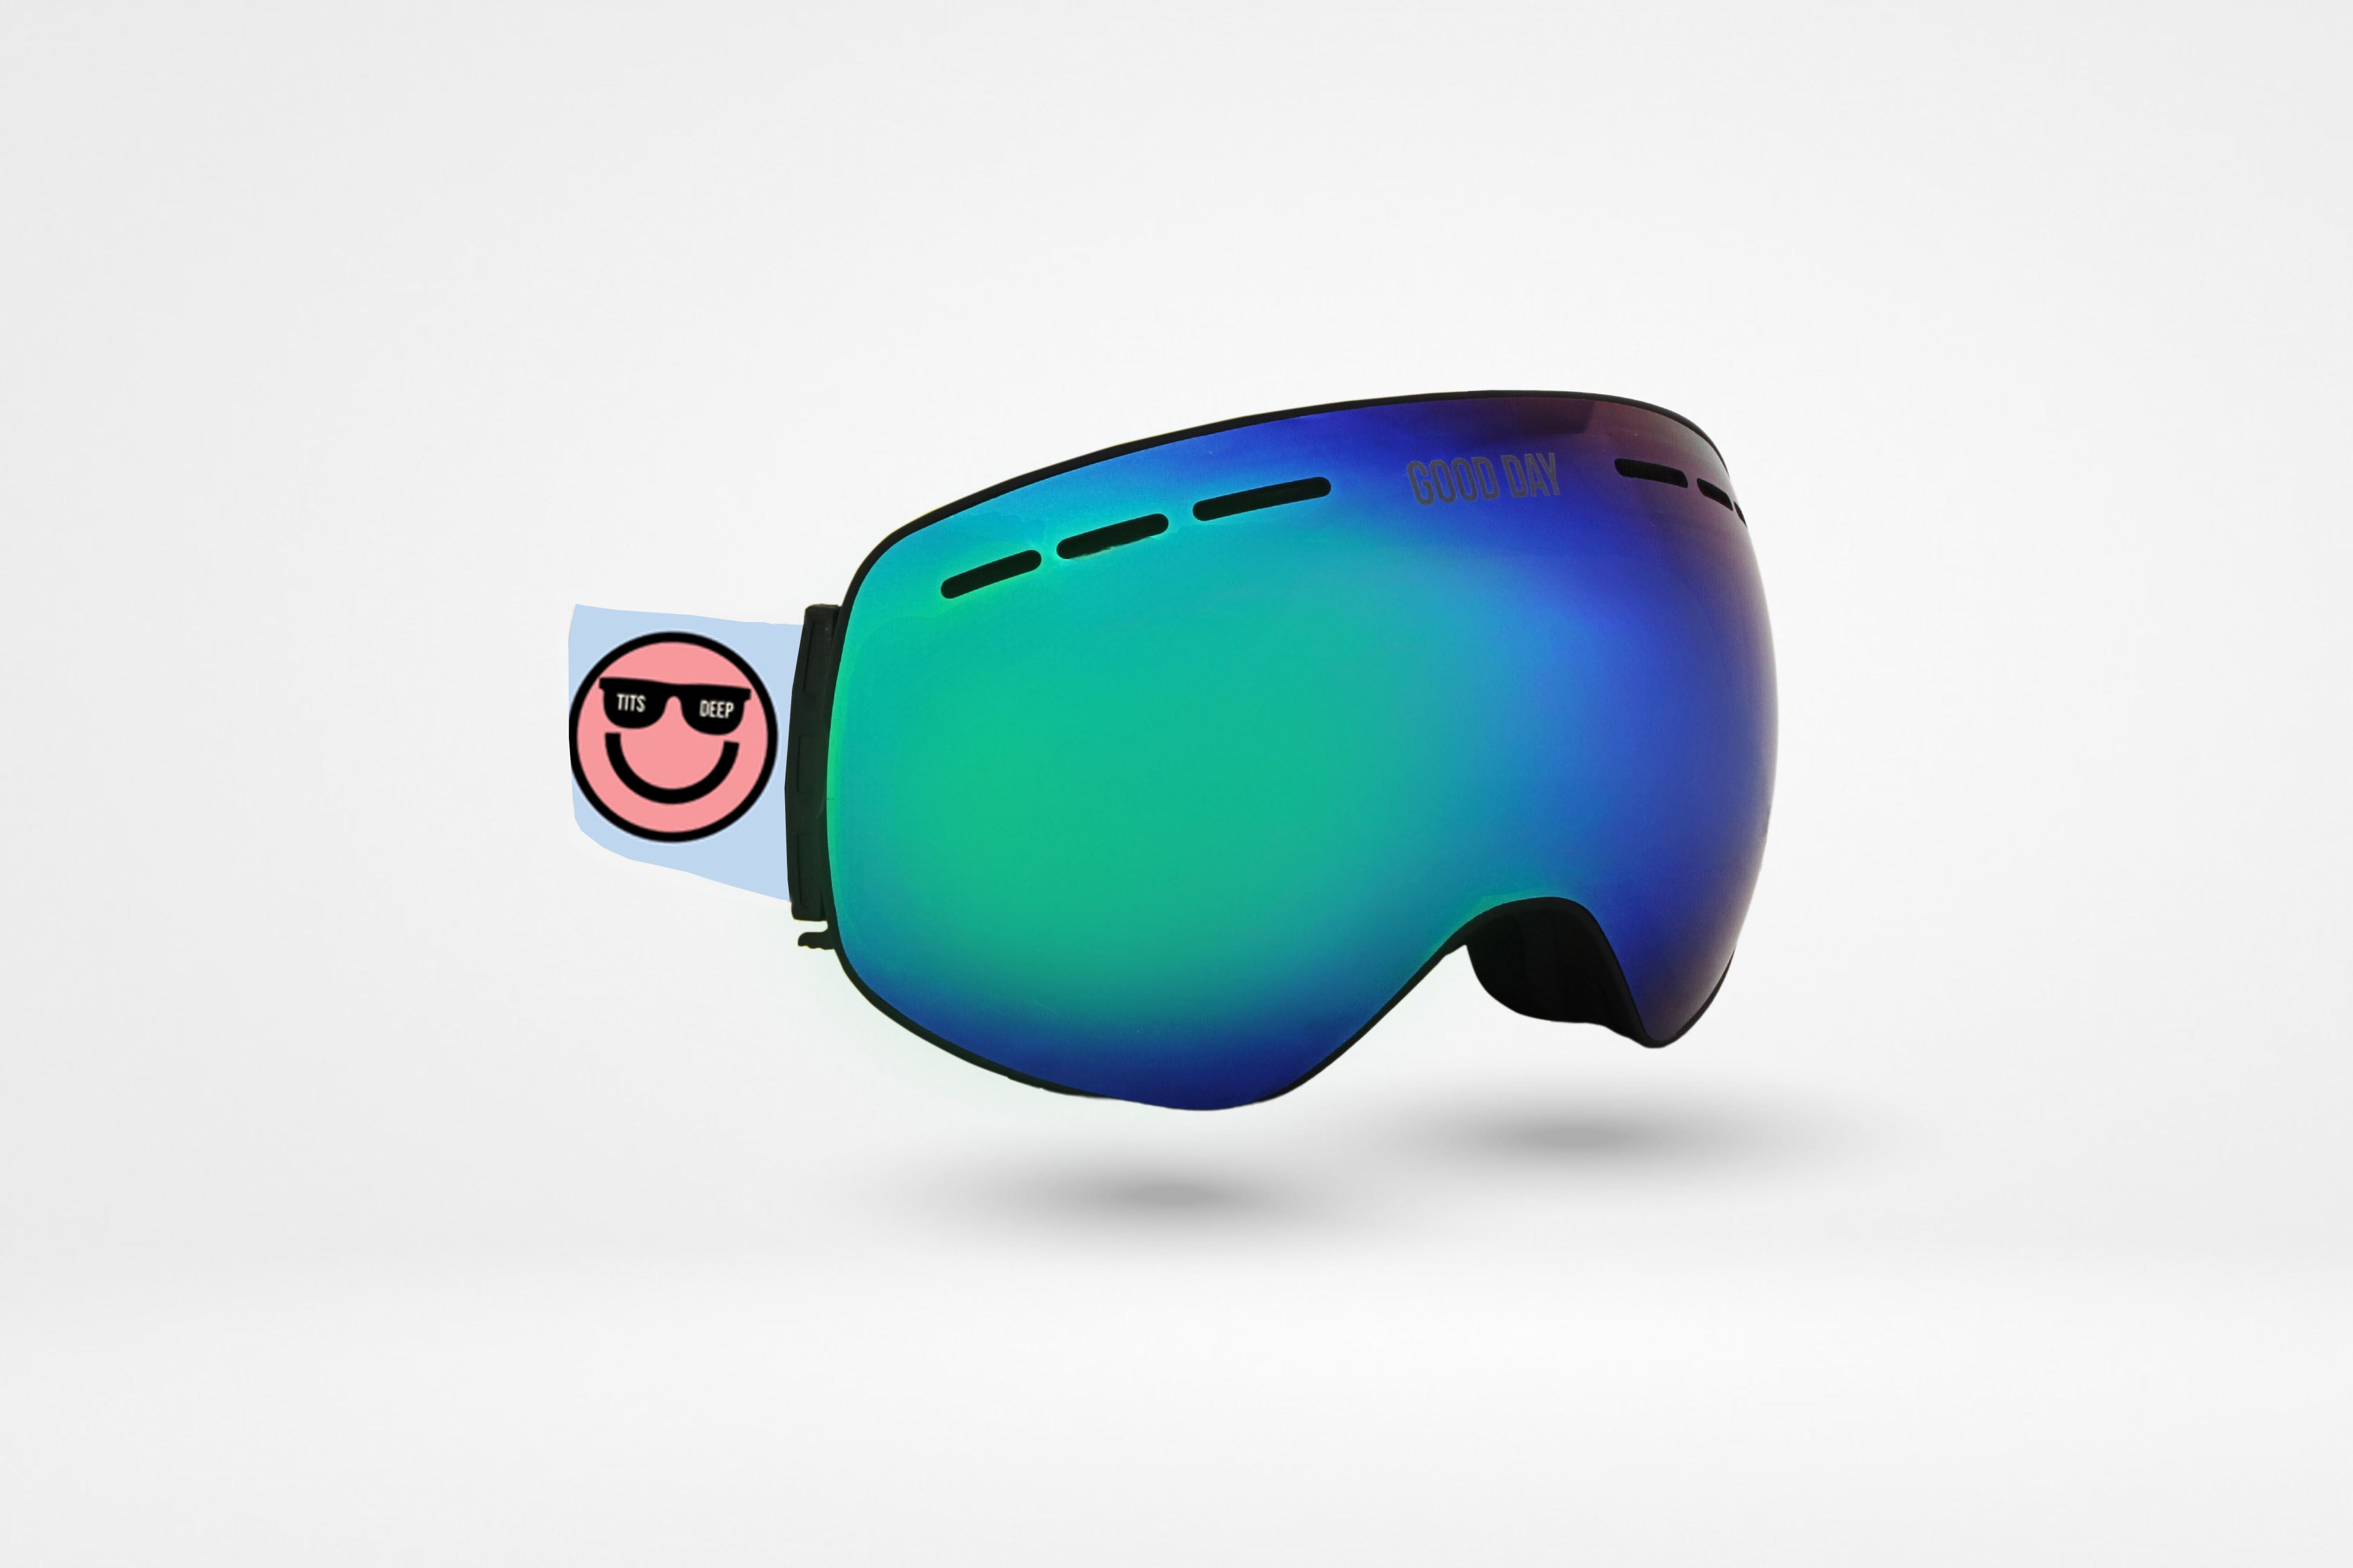 Tits Deep For Breast Cancer Goggle Pre-order